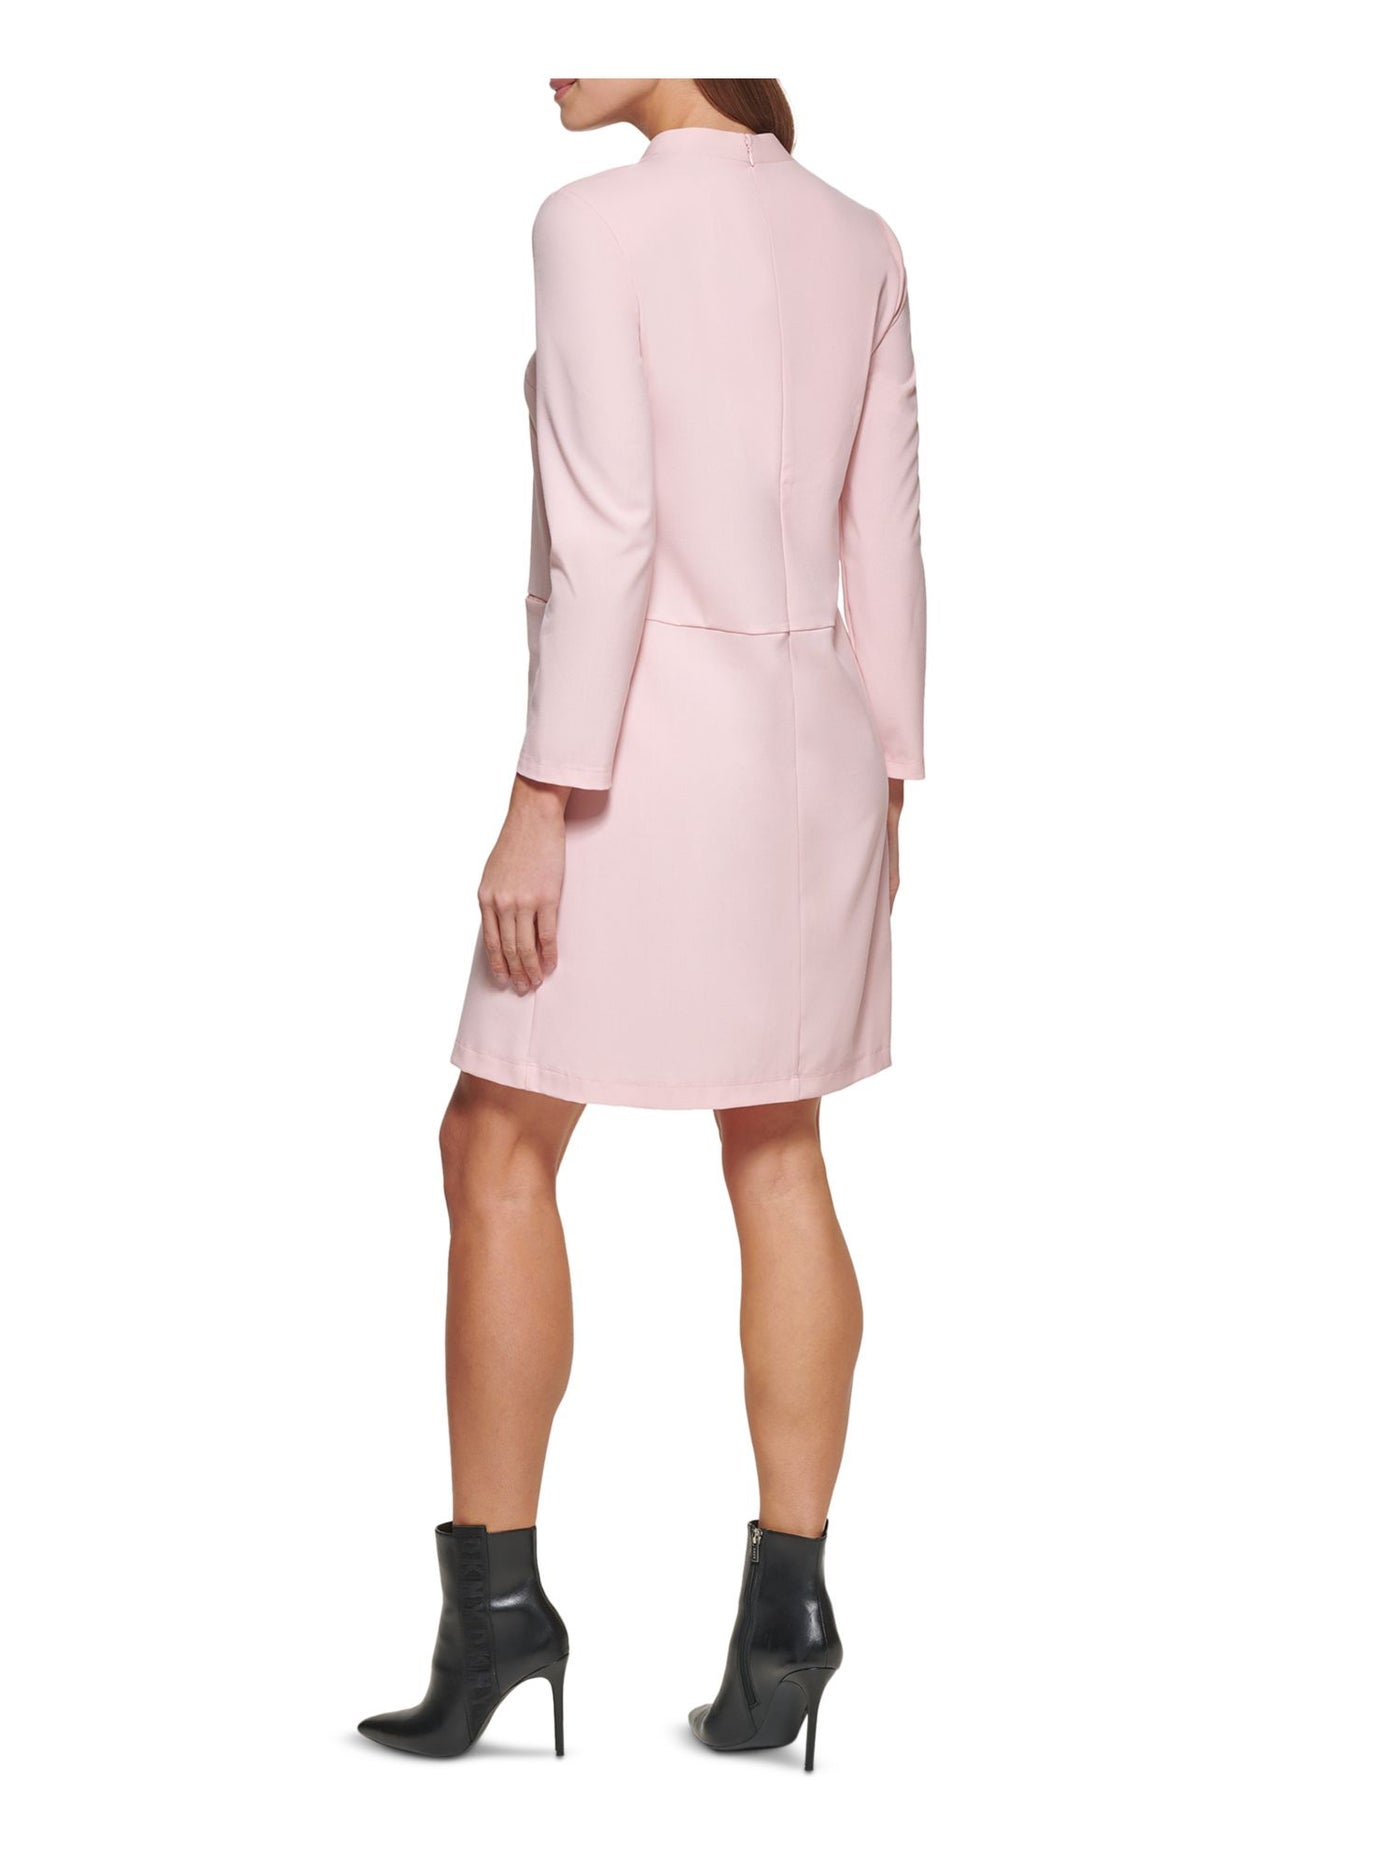 DKNY Womens Pink Zippered Pocketed Lined Long Sleeve V Neck Short Wear To Work Shift Dress 16